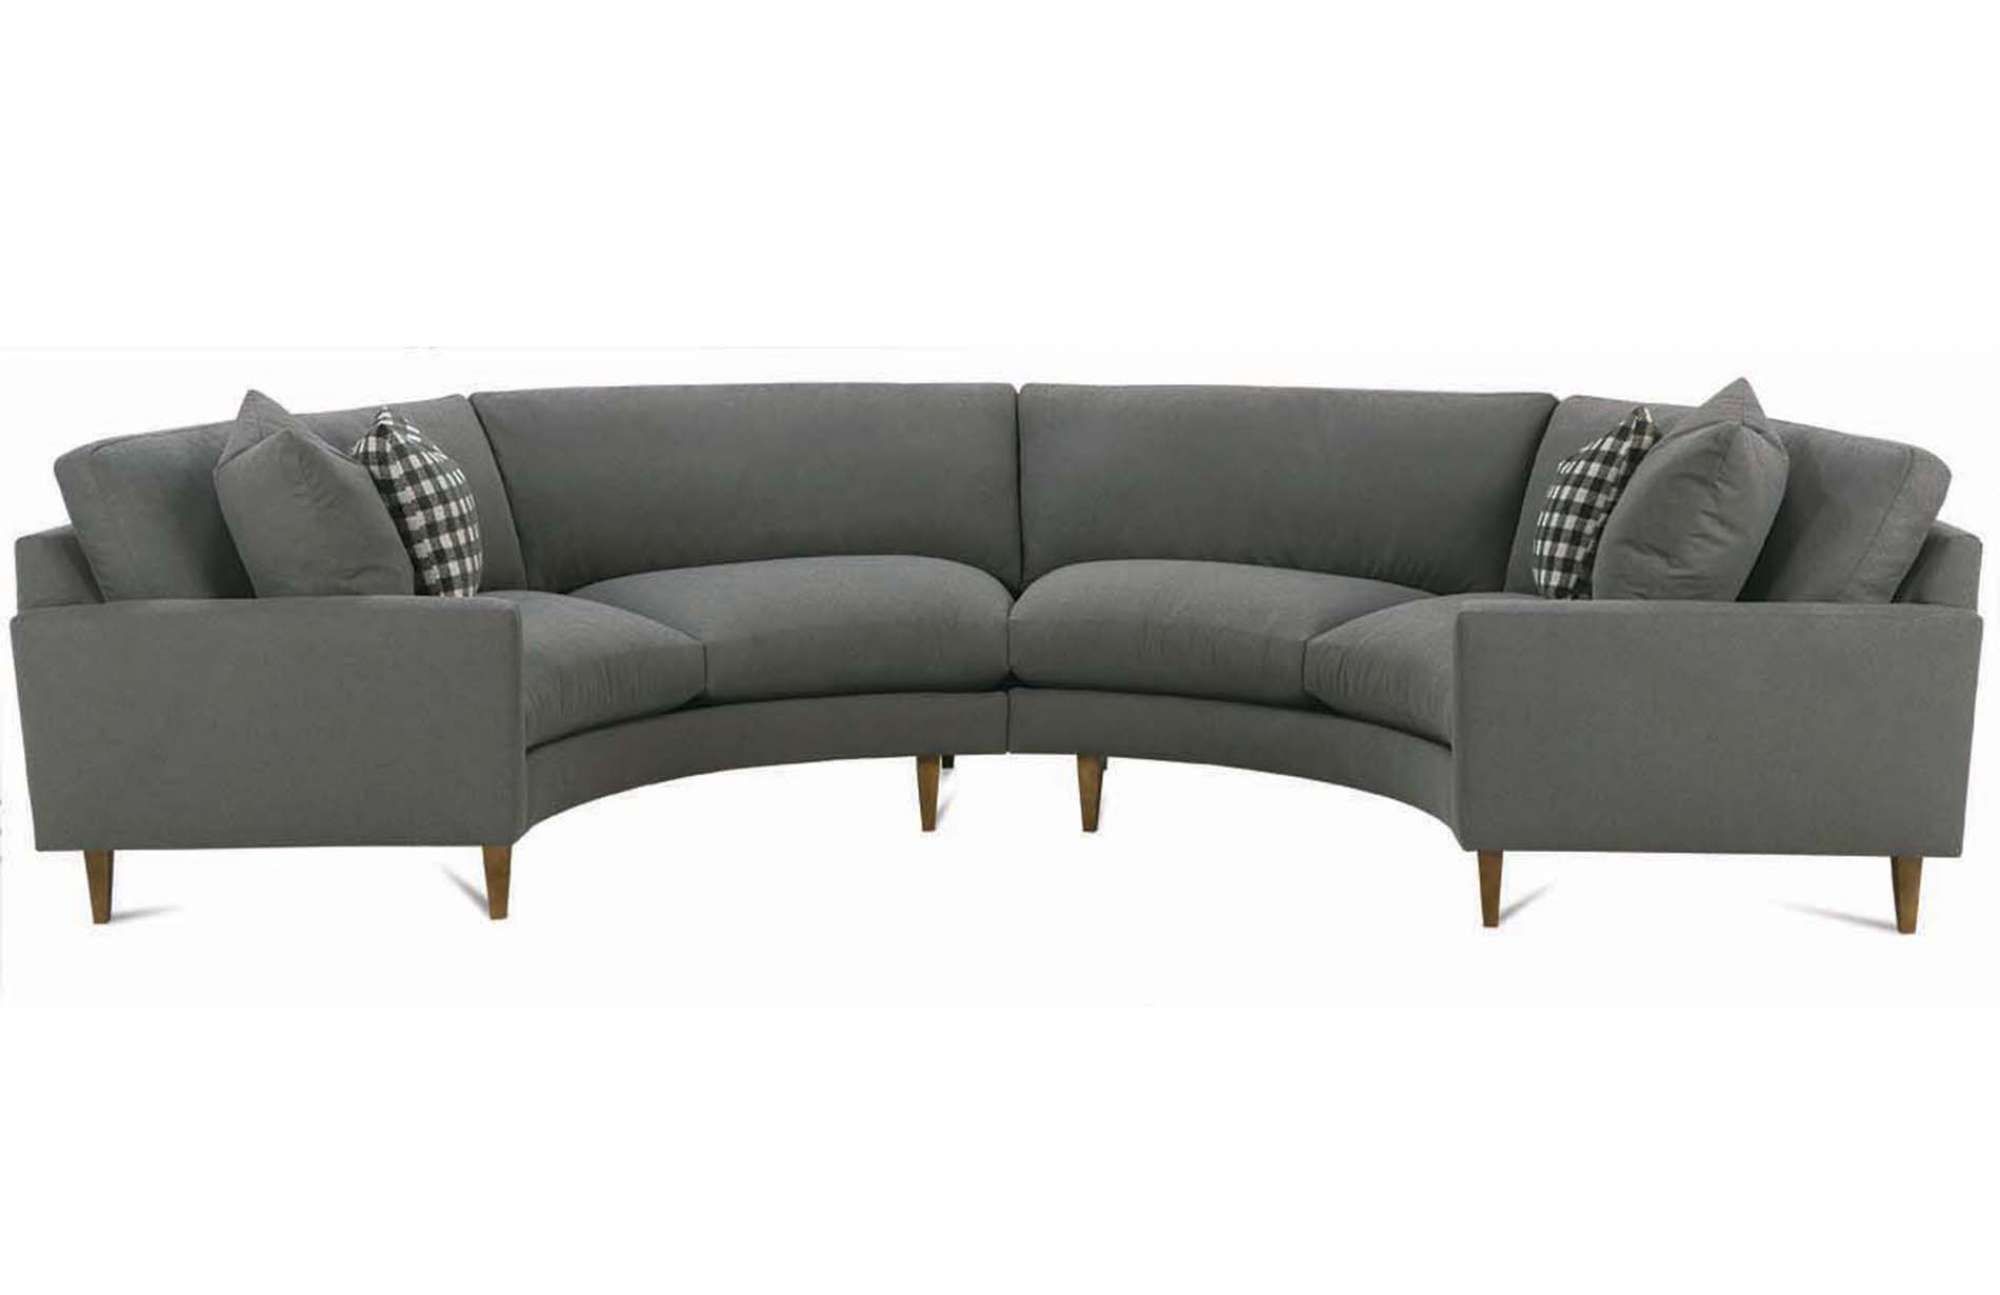 Ripley Curved Sectional – Mobilia Pertaining To 130" Curved Sectionals (Gallery 11 of 20)